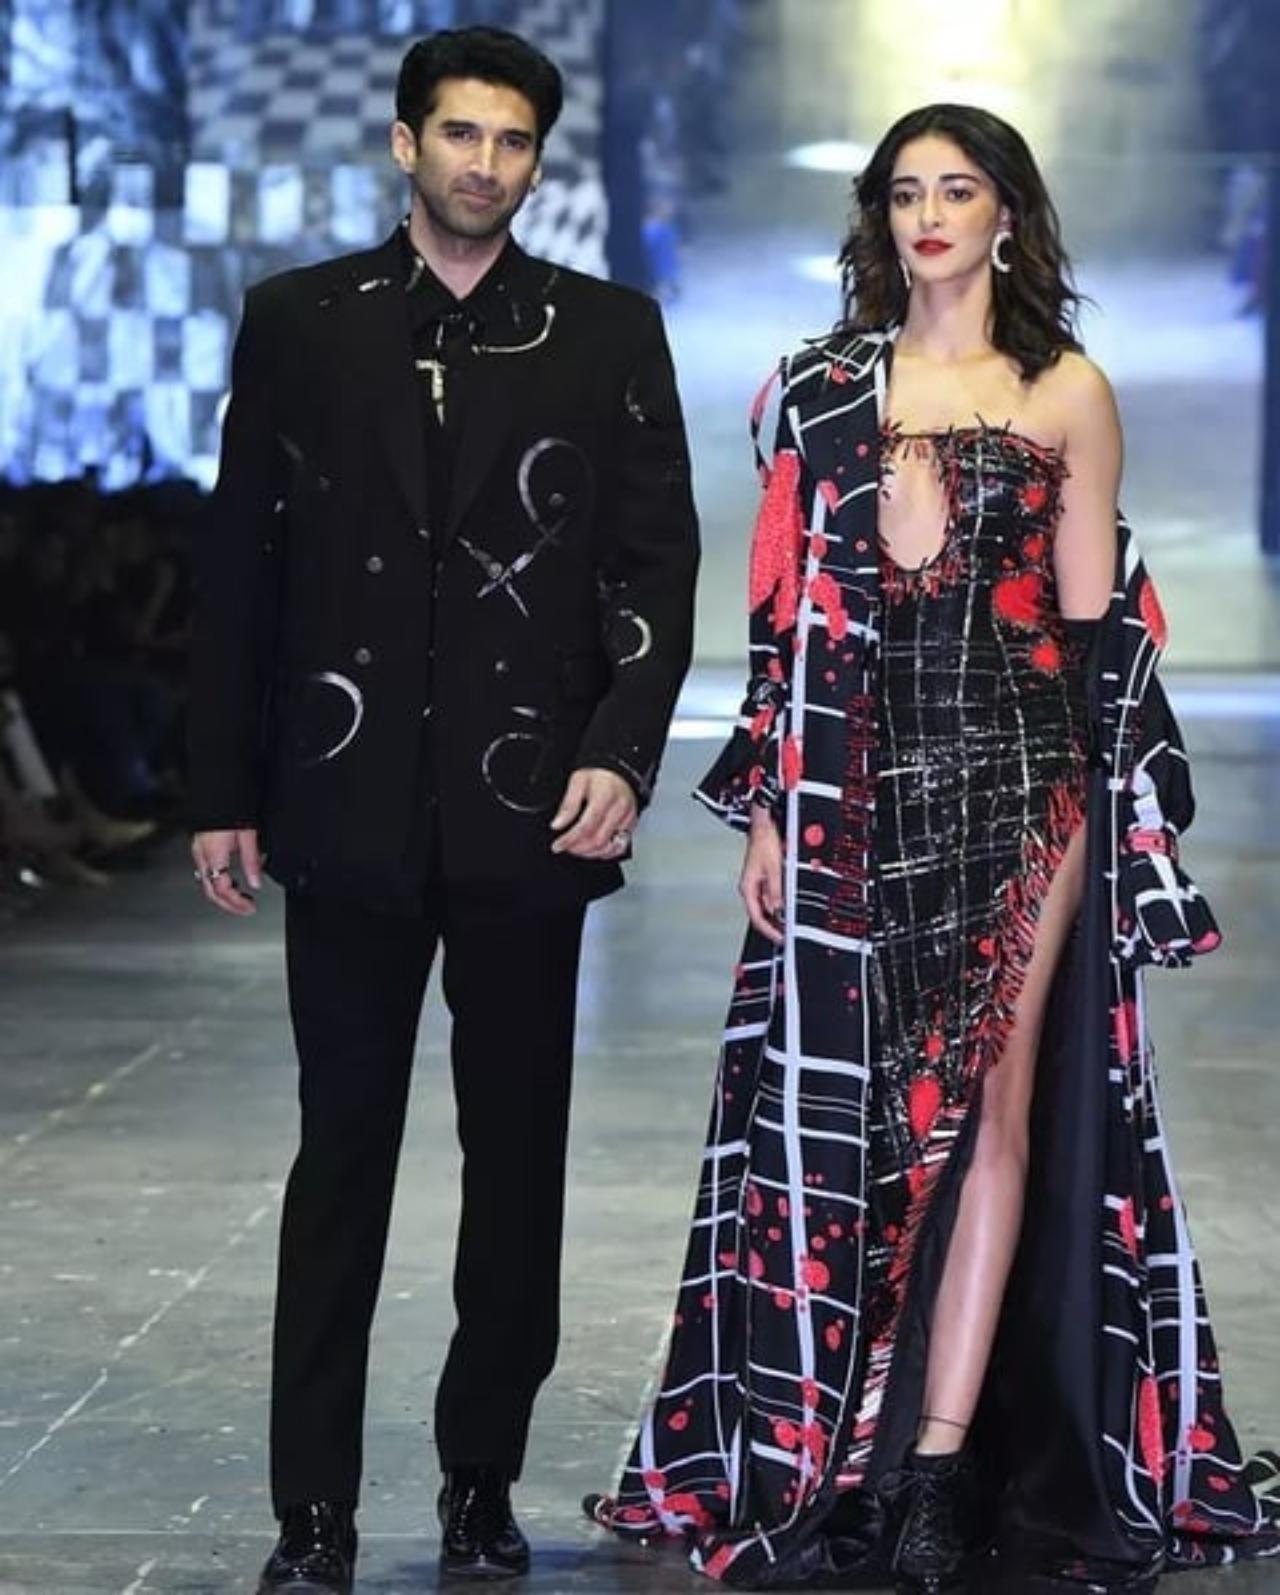 Ananya and Aditya had all heads turning when they walked together at the Lakme fashion week 